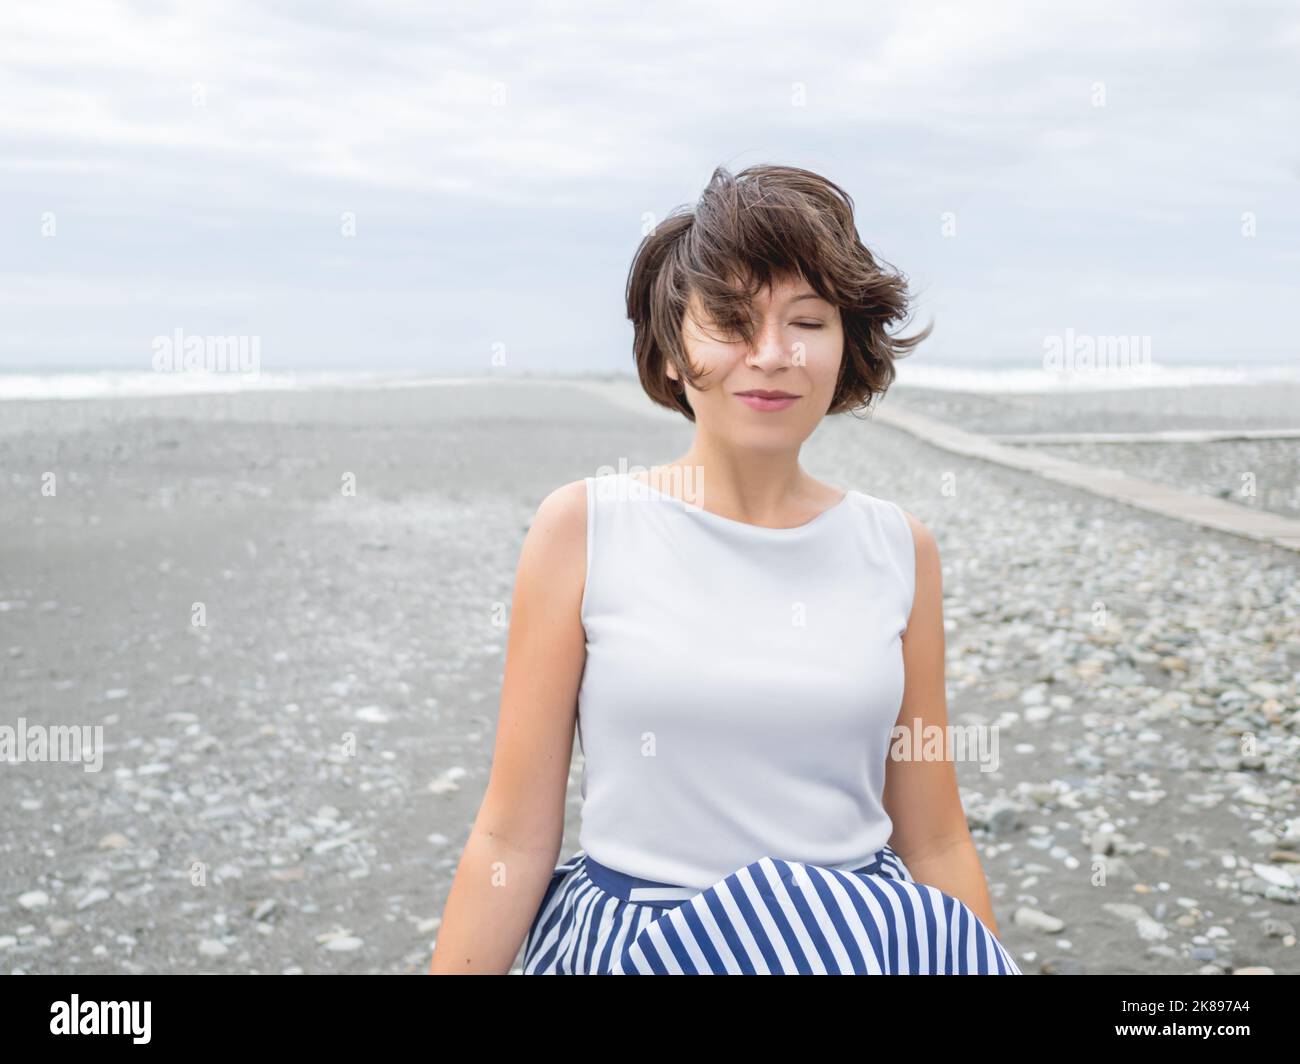 Portrait of smiling woman on seaside. Woman with hair ruffled with the wind. Wanderlust concept. Vacation on sea coast. Stock Photo